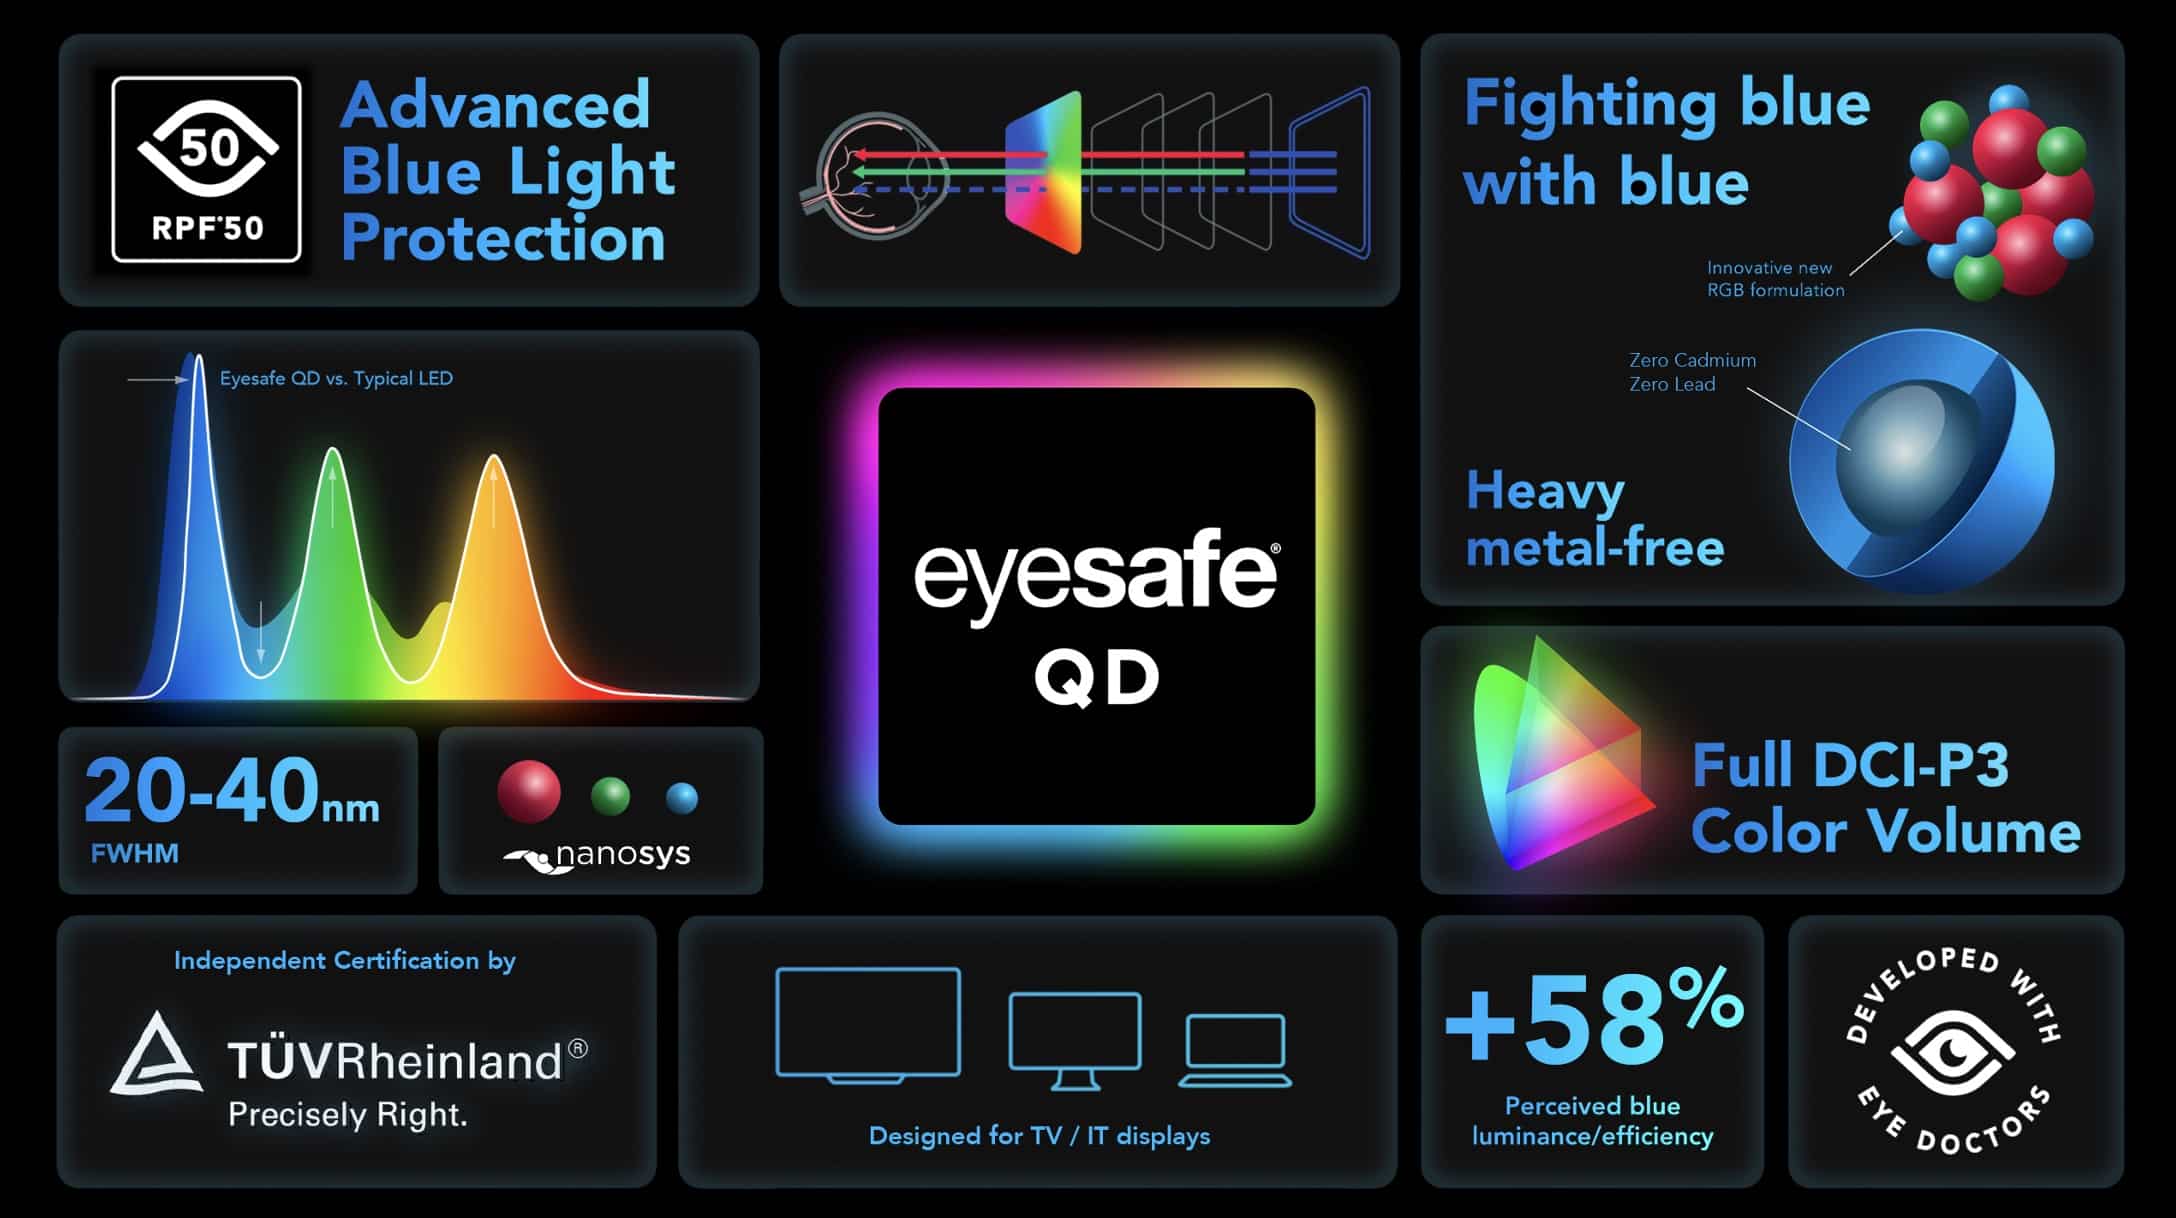 Eyesafe QD fulfills several needs within the display industry.